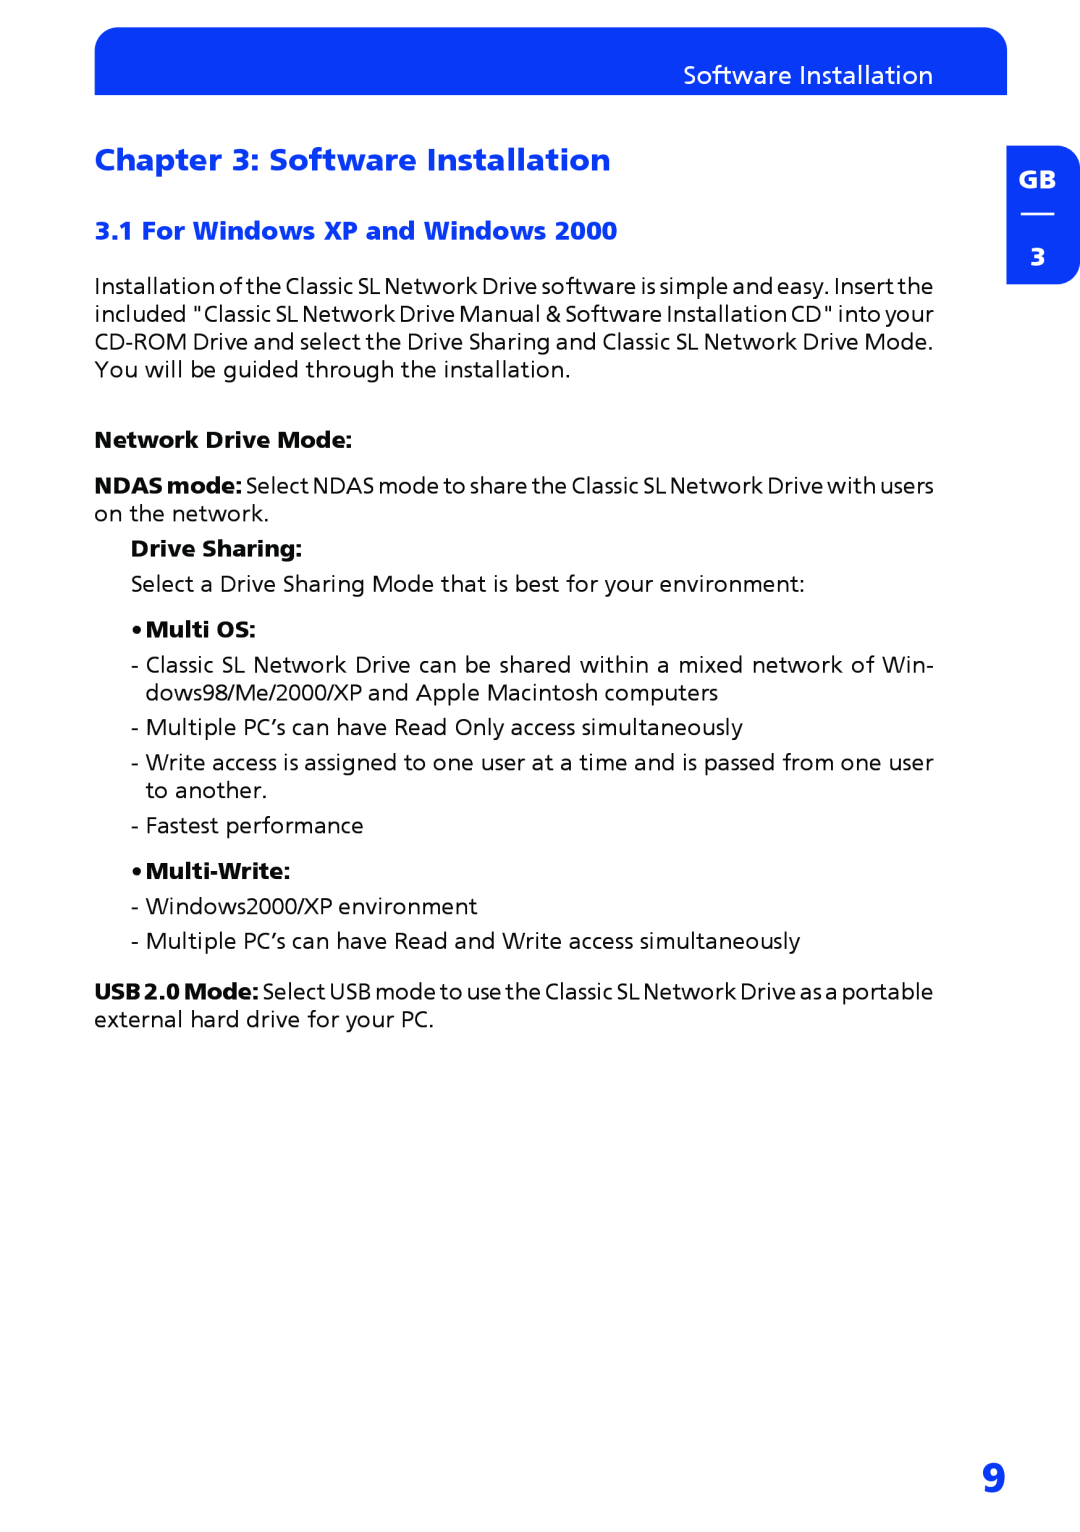 Freecom Technologies Network hard drive manual Software Installation, For Windows XP and Windows 